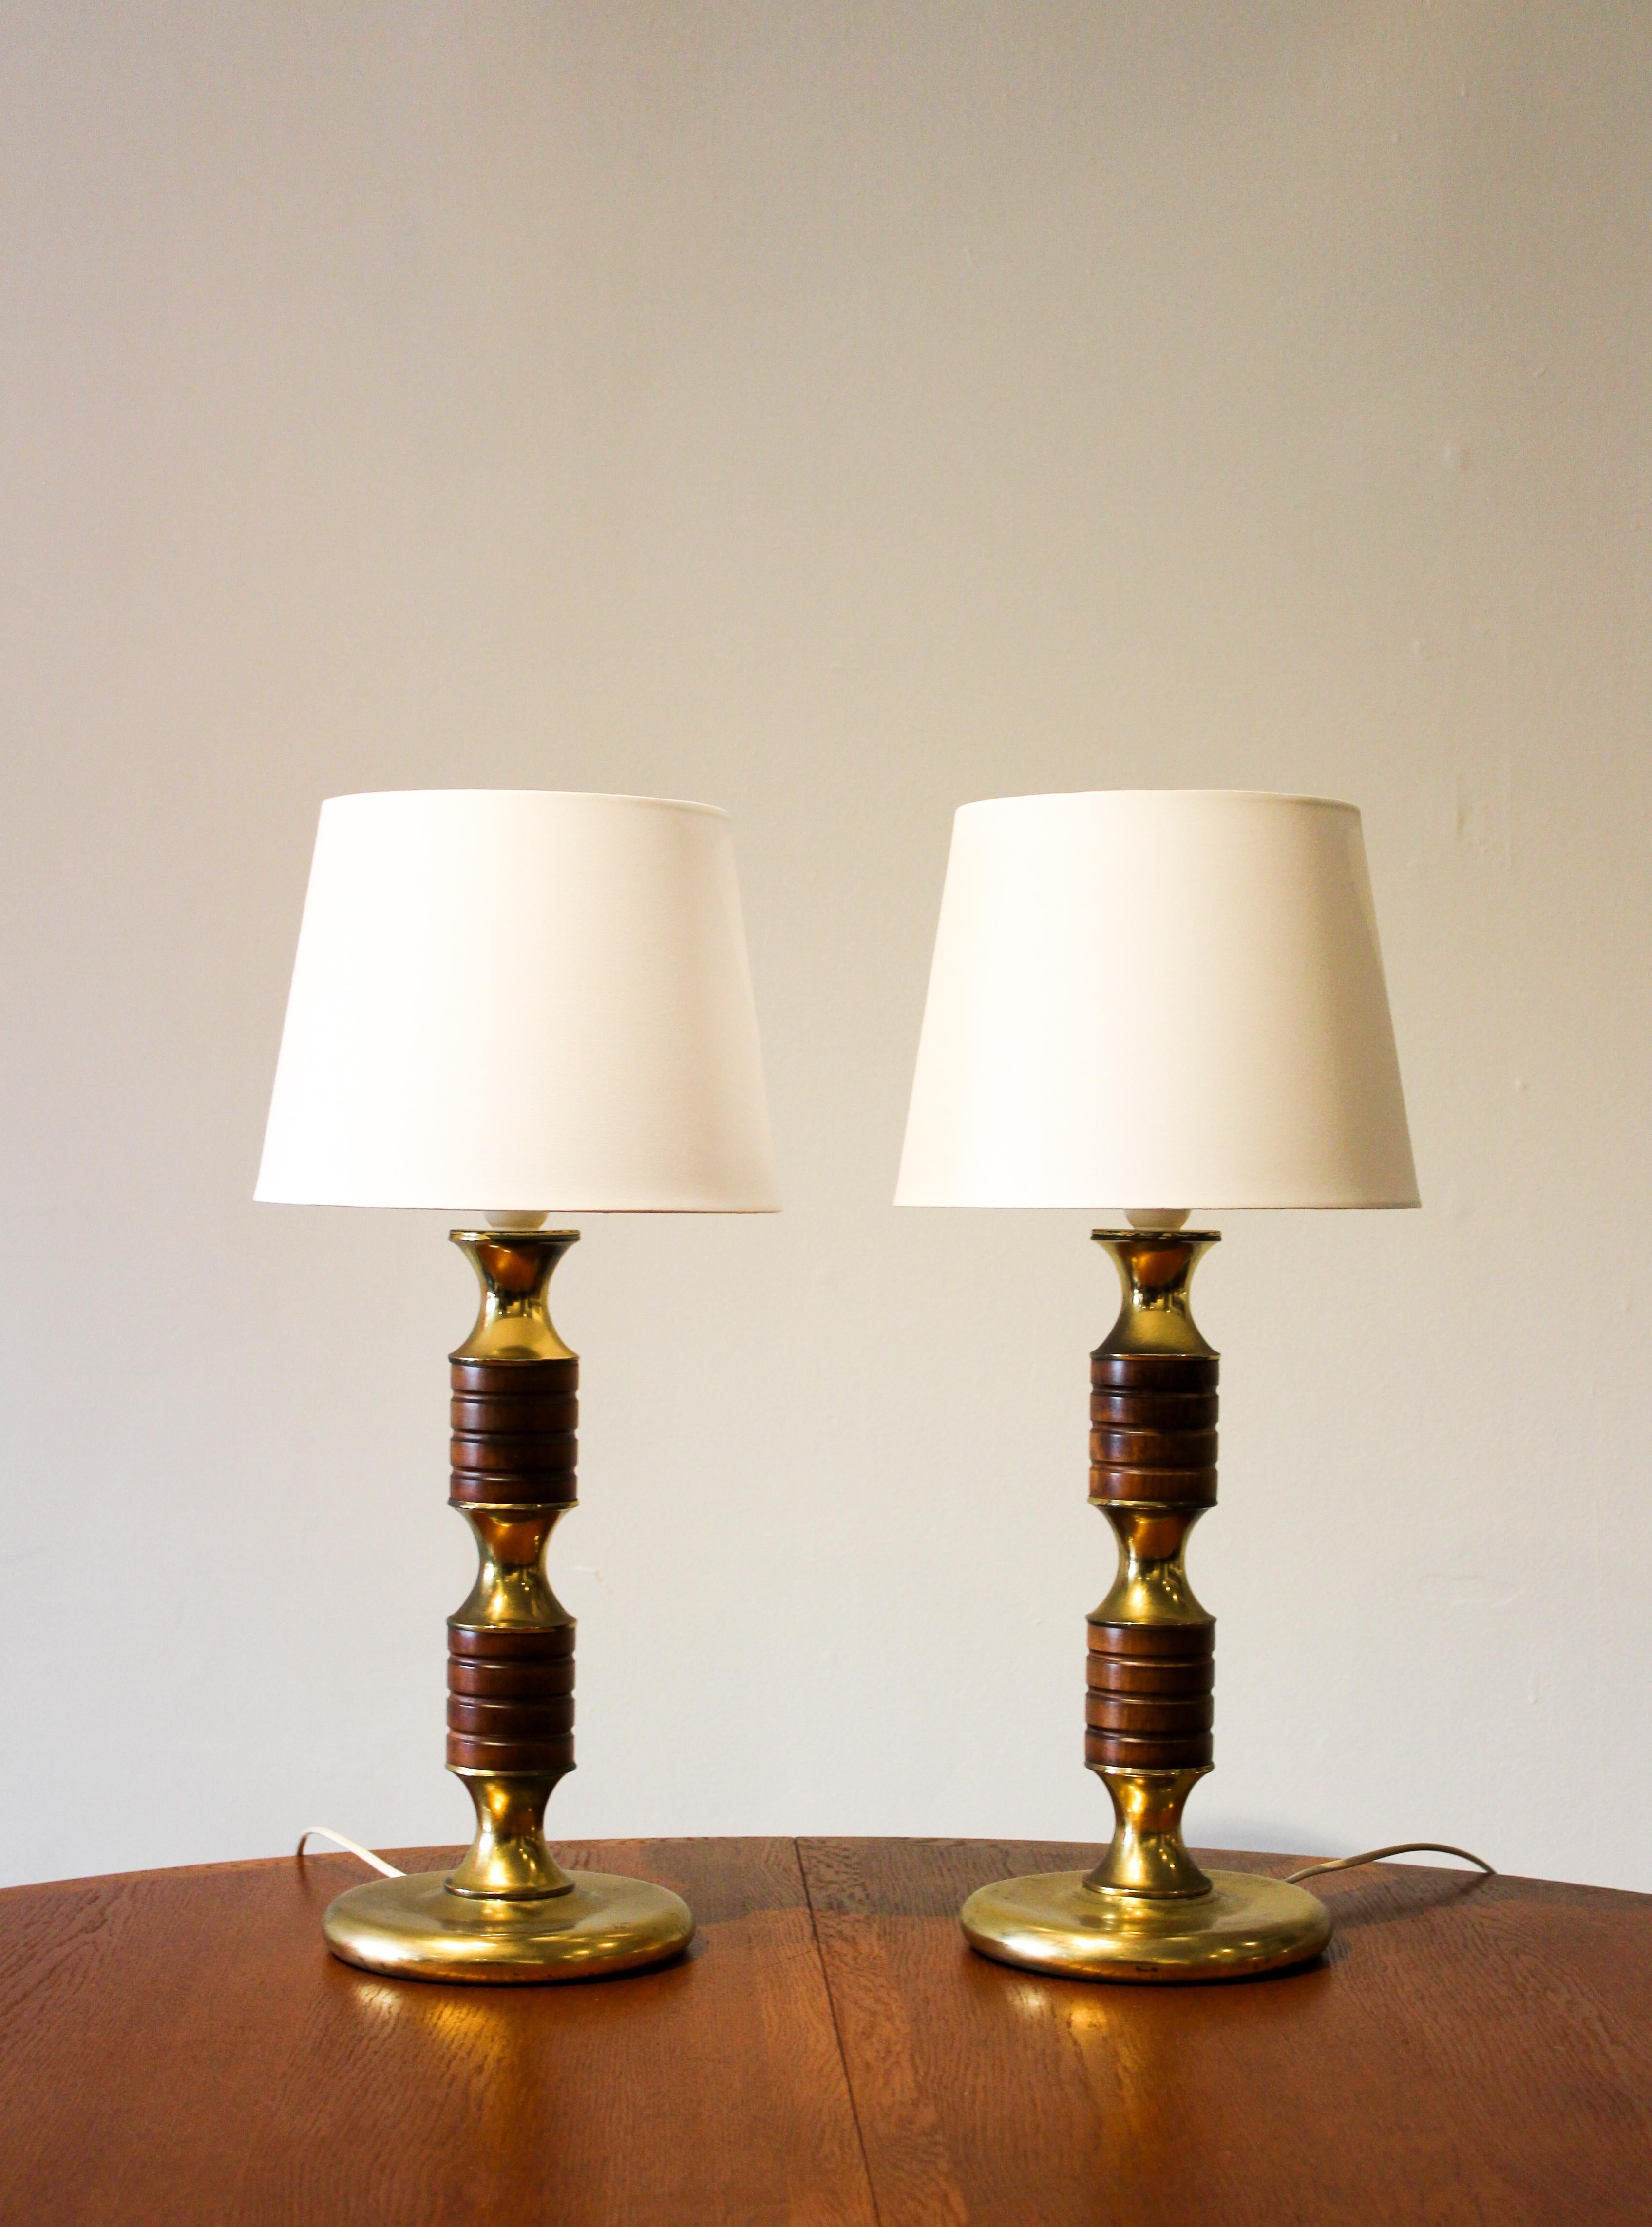 A pair of very decorative table lamps made in Sweden during the 1950s. The lamps are made out of brass with teak details. The condition is good with signs of usage and patina consistent with age. Sold as a pair. The shades are newer and not